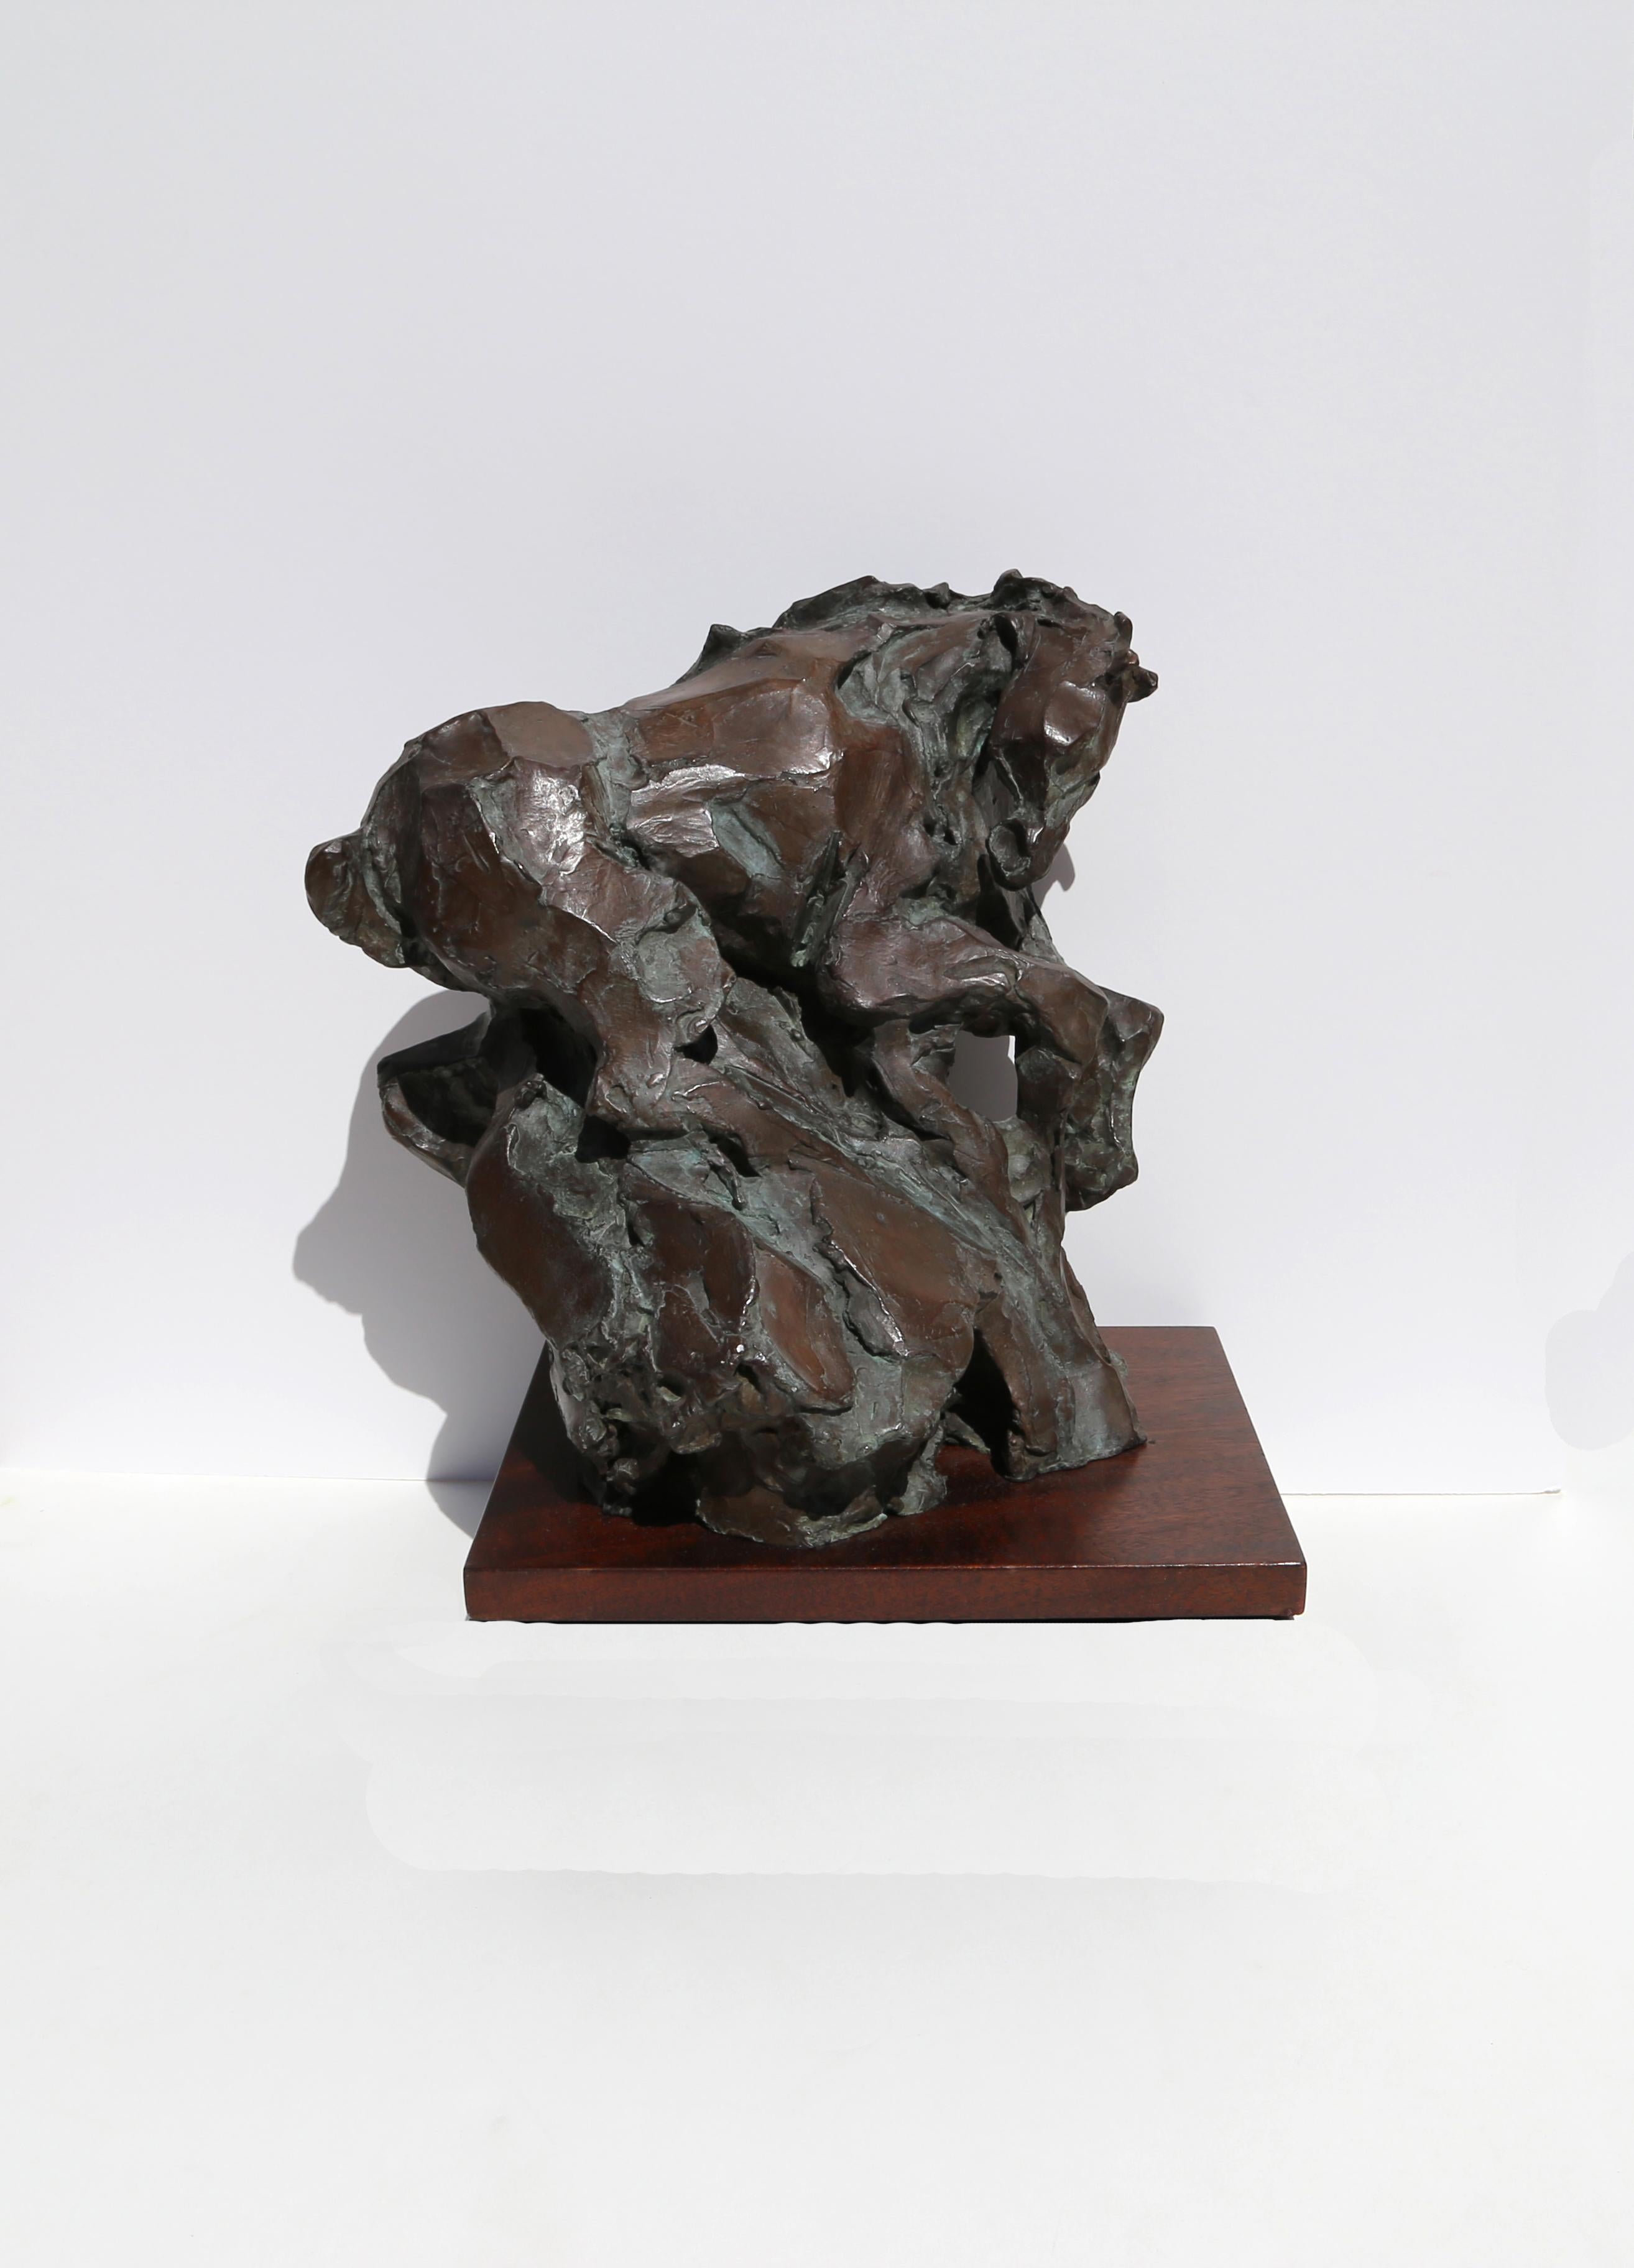 Artist: Jean Richardson, American (1940 -  )
Title: Genesis
Year: 1989
Medium:	Bronze Sculpture, signature and numbering inscribed
Edition: 50
Size: 16 x 15.5 x 12 inches
Base: 1.5 x 14 x 11 inches